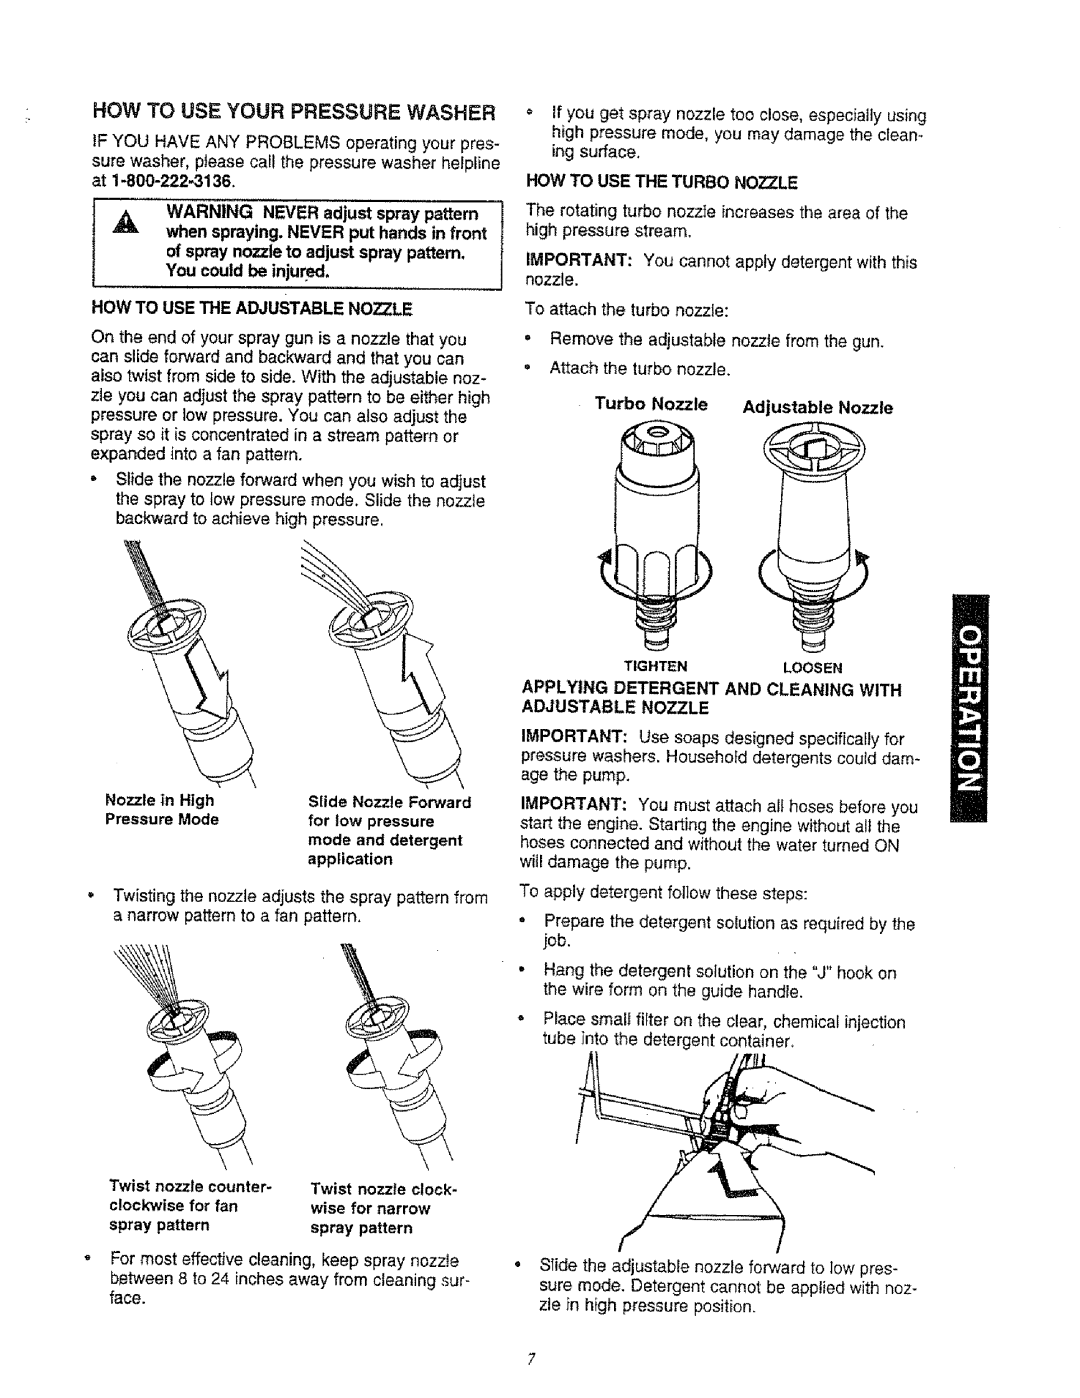 Sears 580.761652 manual How To Use Your Pressure Washer, WARNING NEVER adjust spray pattern, You could be injured 